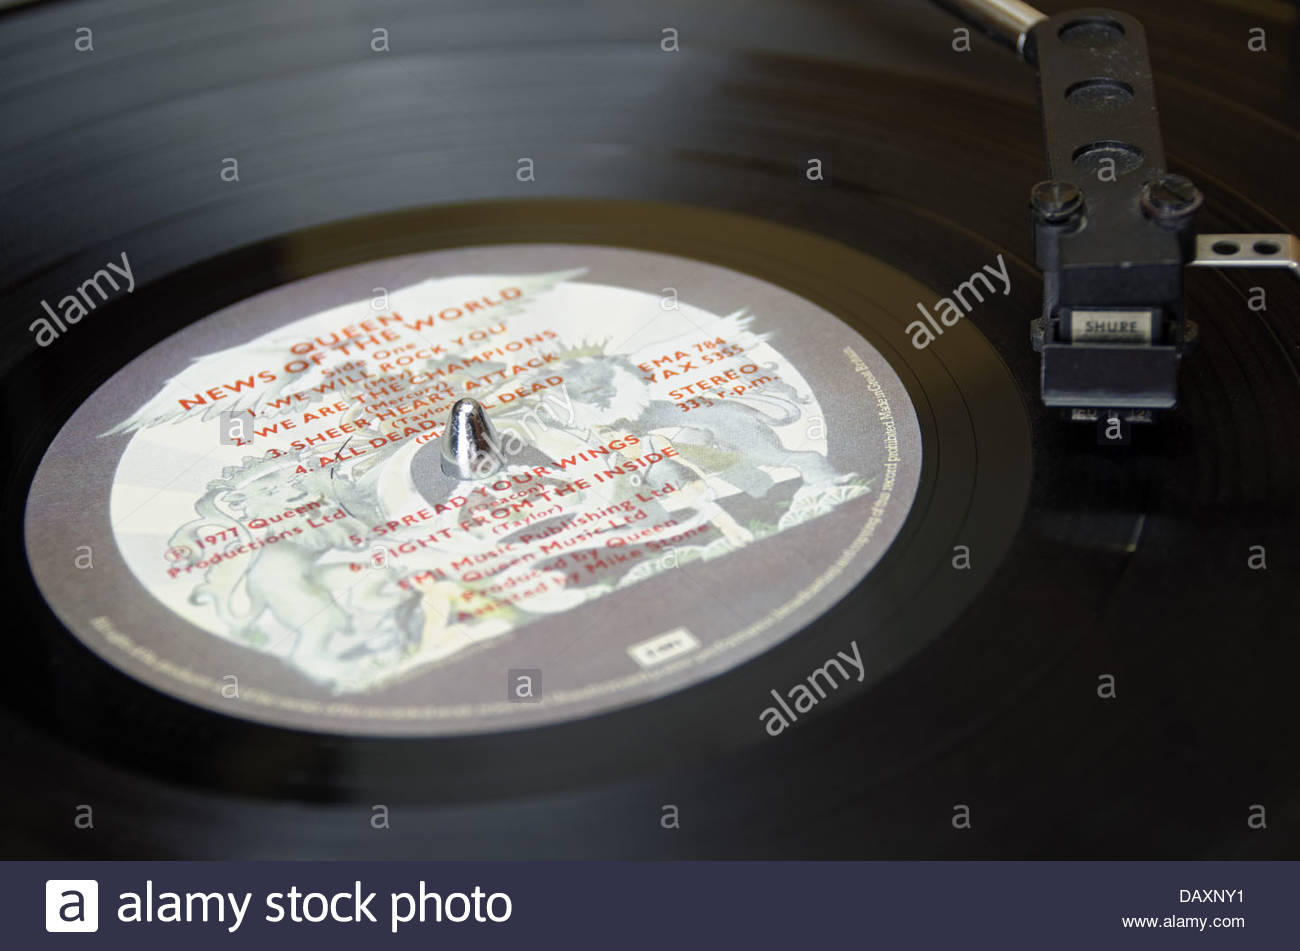 EMI Records record company music label for the album News Of The Stock